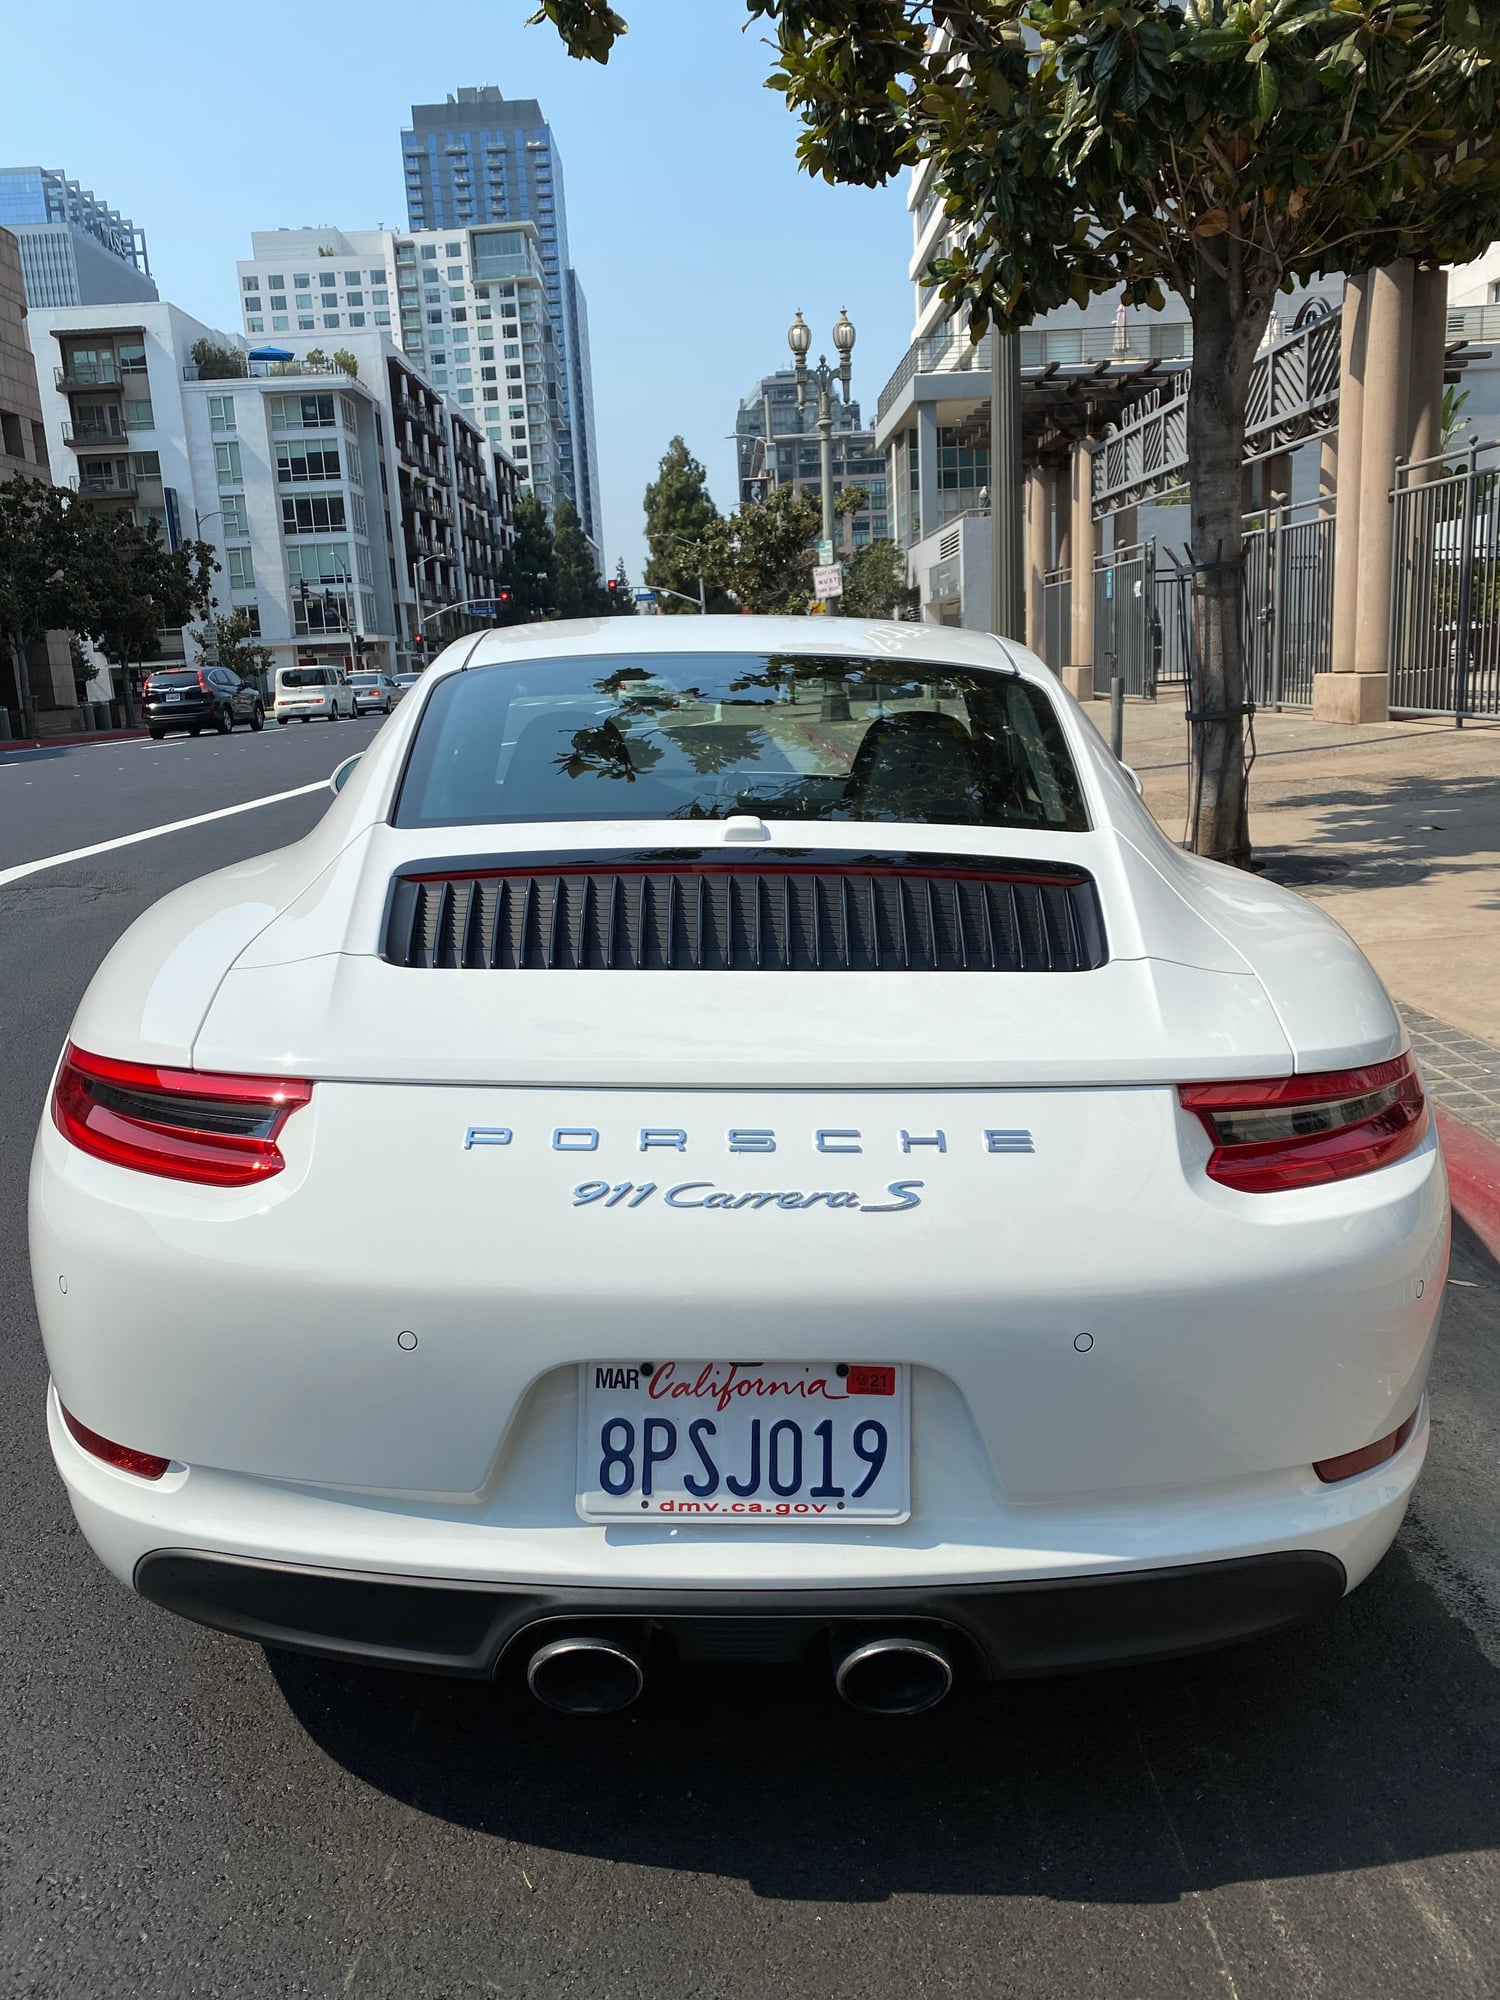 2019 Porsche 911 Carrera S Lease Takeover - $1,360 or sell for $105,000 -  Rennlist - Porsche Discussion Forums